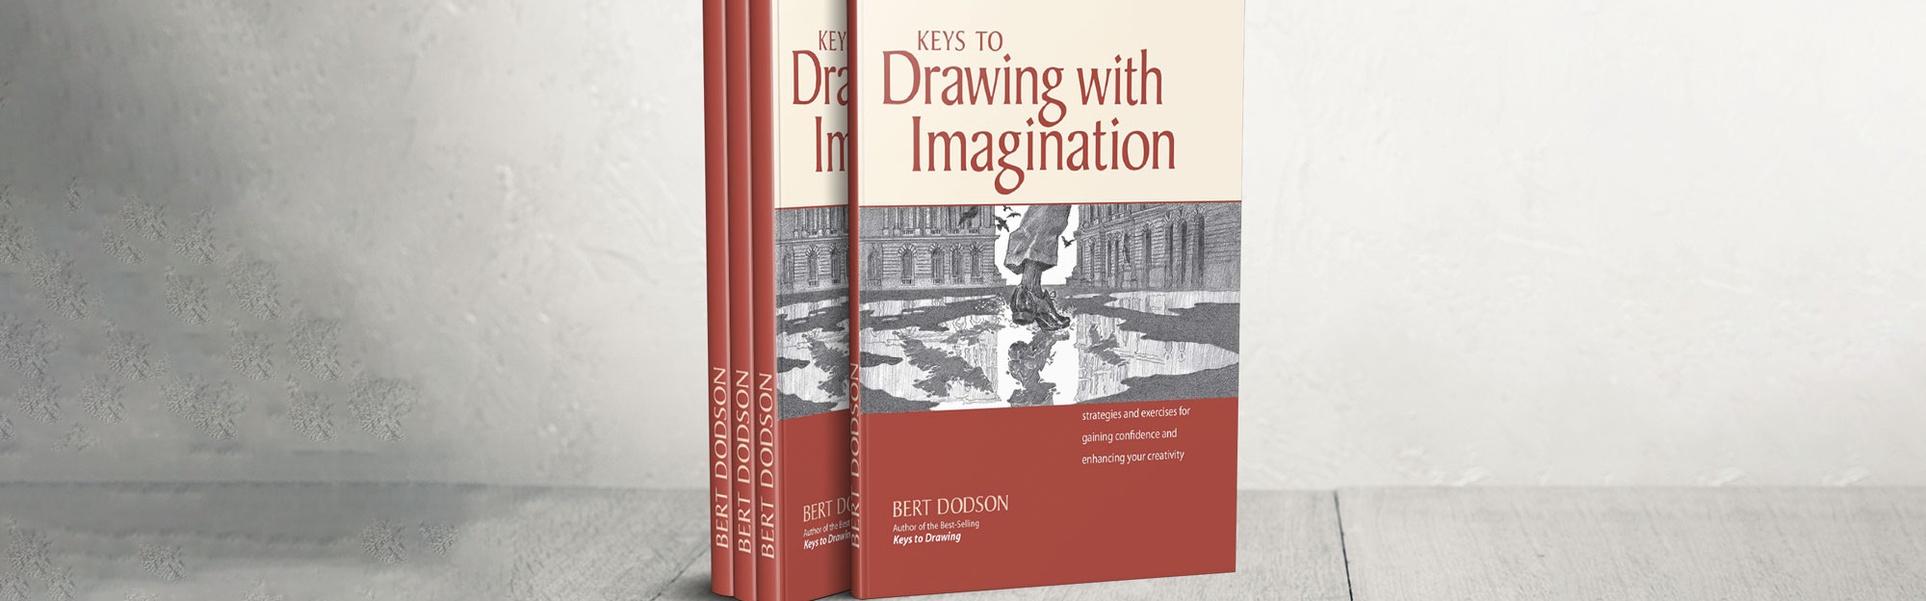 Book of The Keys to Drawing with Imagination